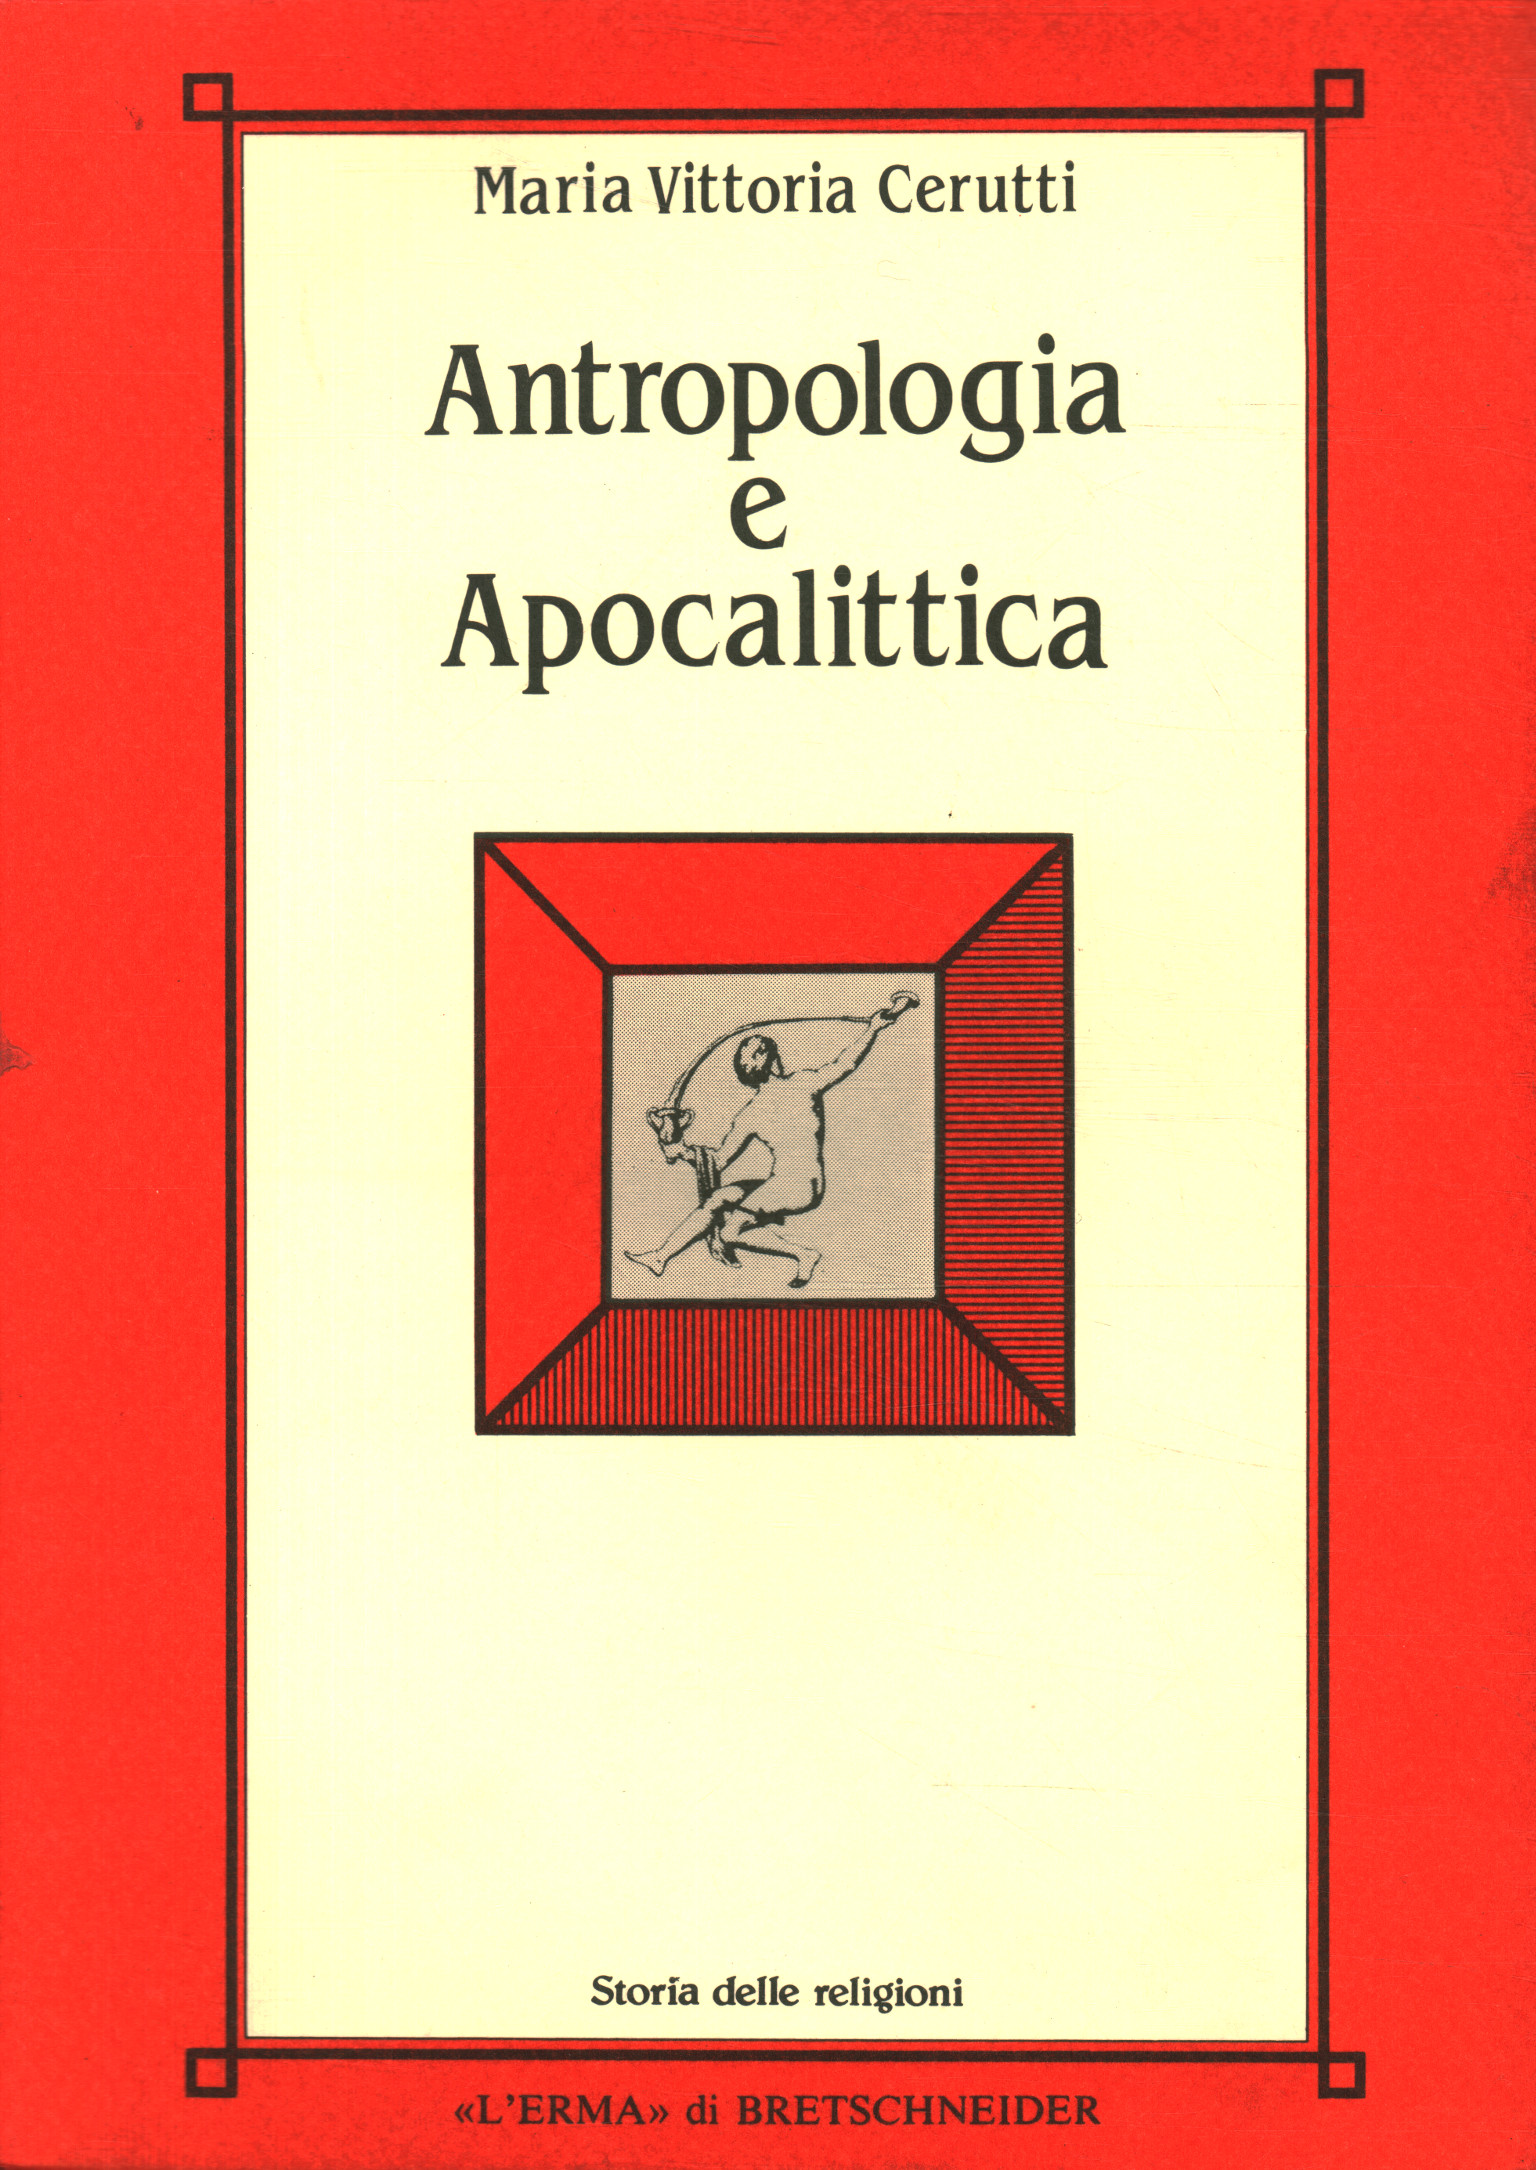 Anthropology and Apocalyptic